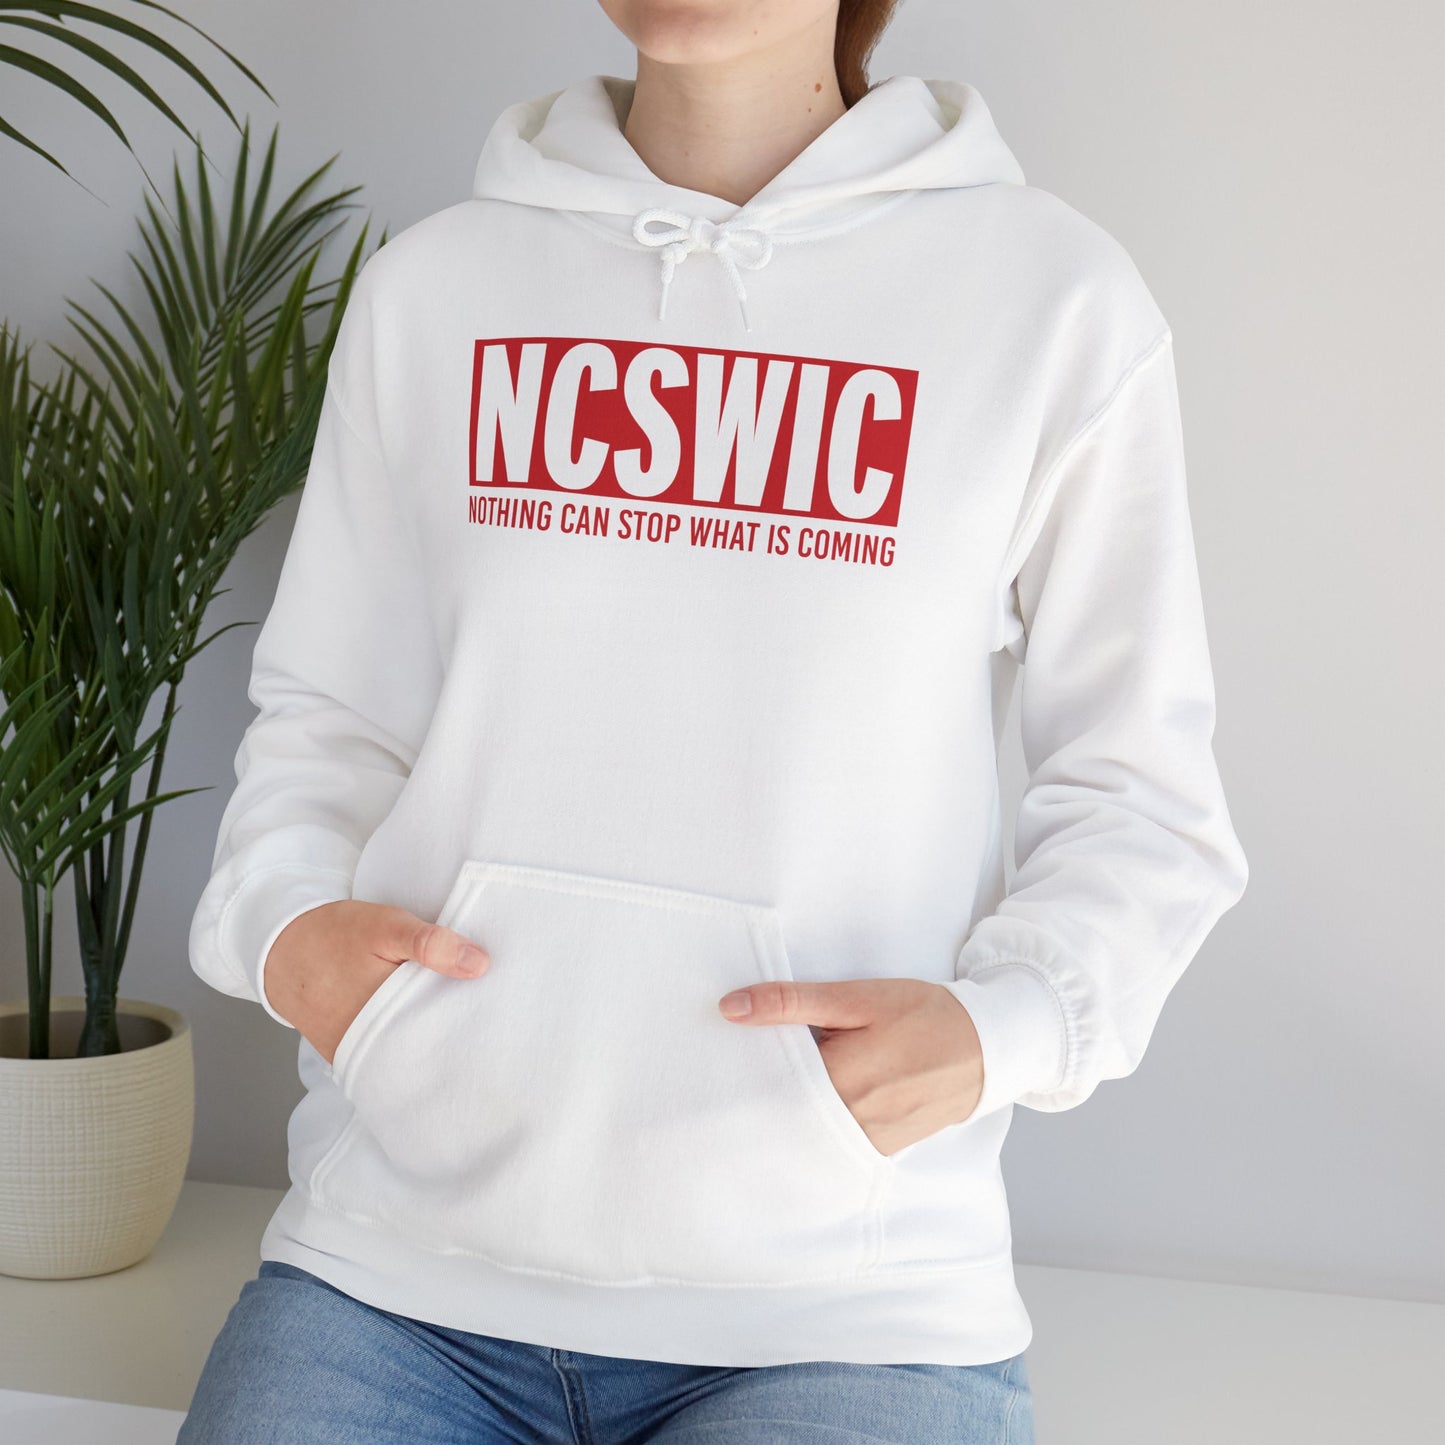 Patriot Hoodie For Conservative Hooded Sweatshirt For NCSWIC Message